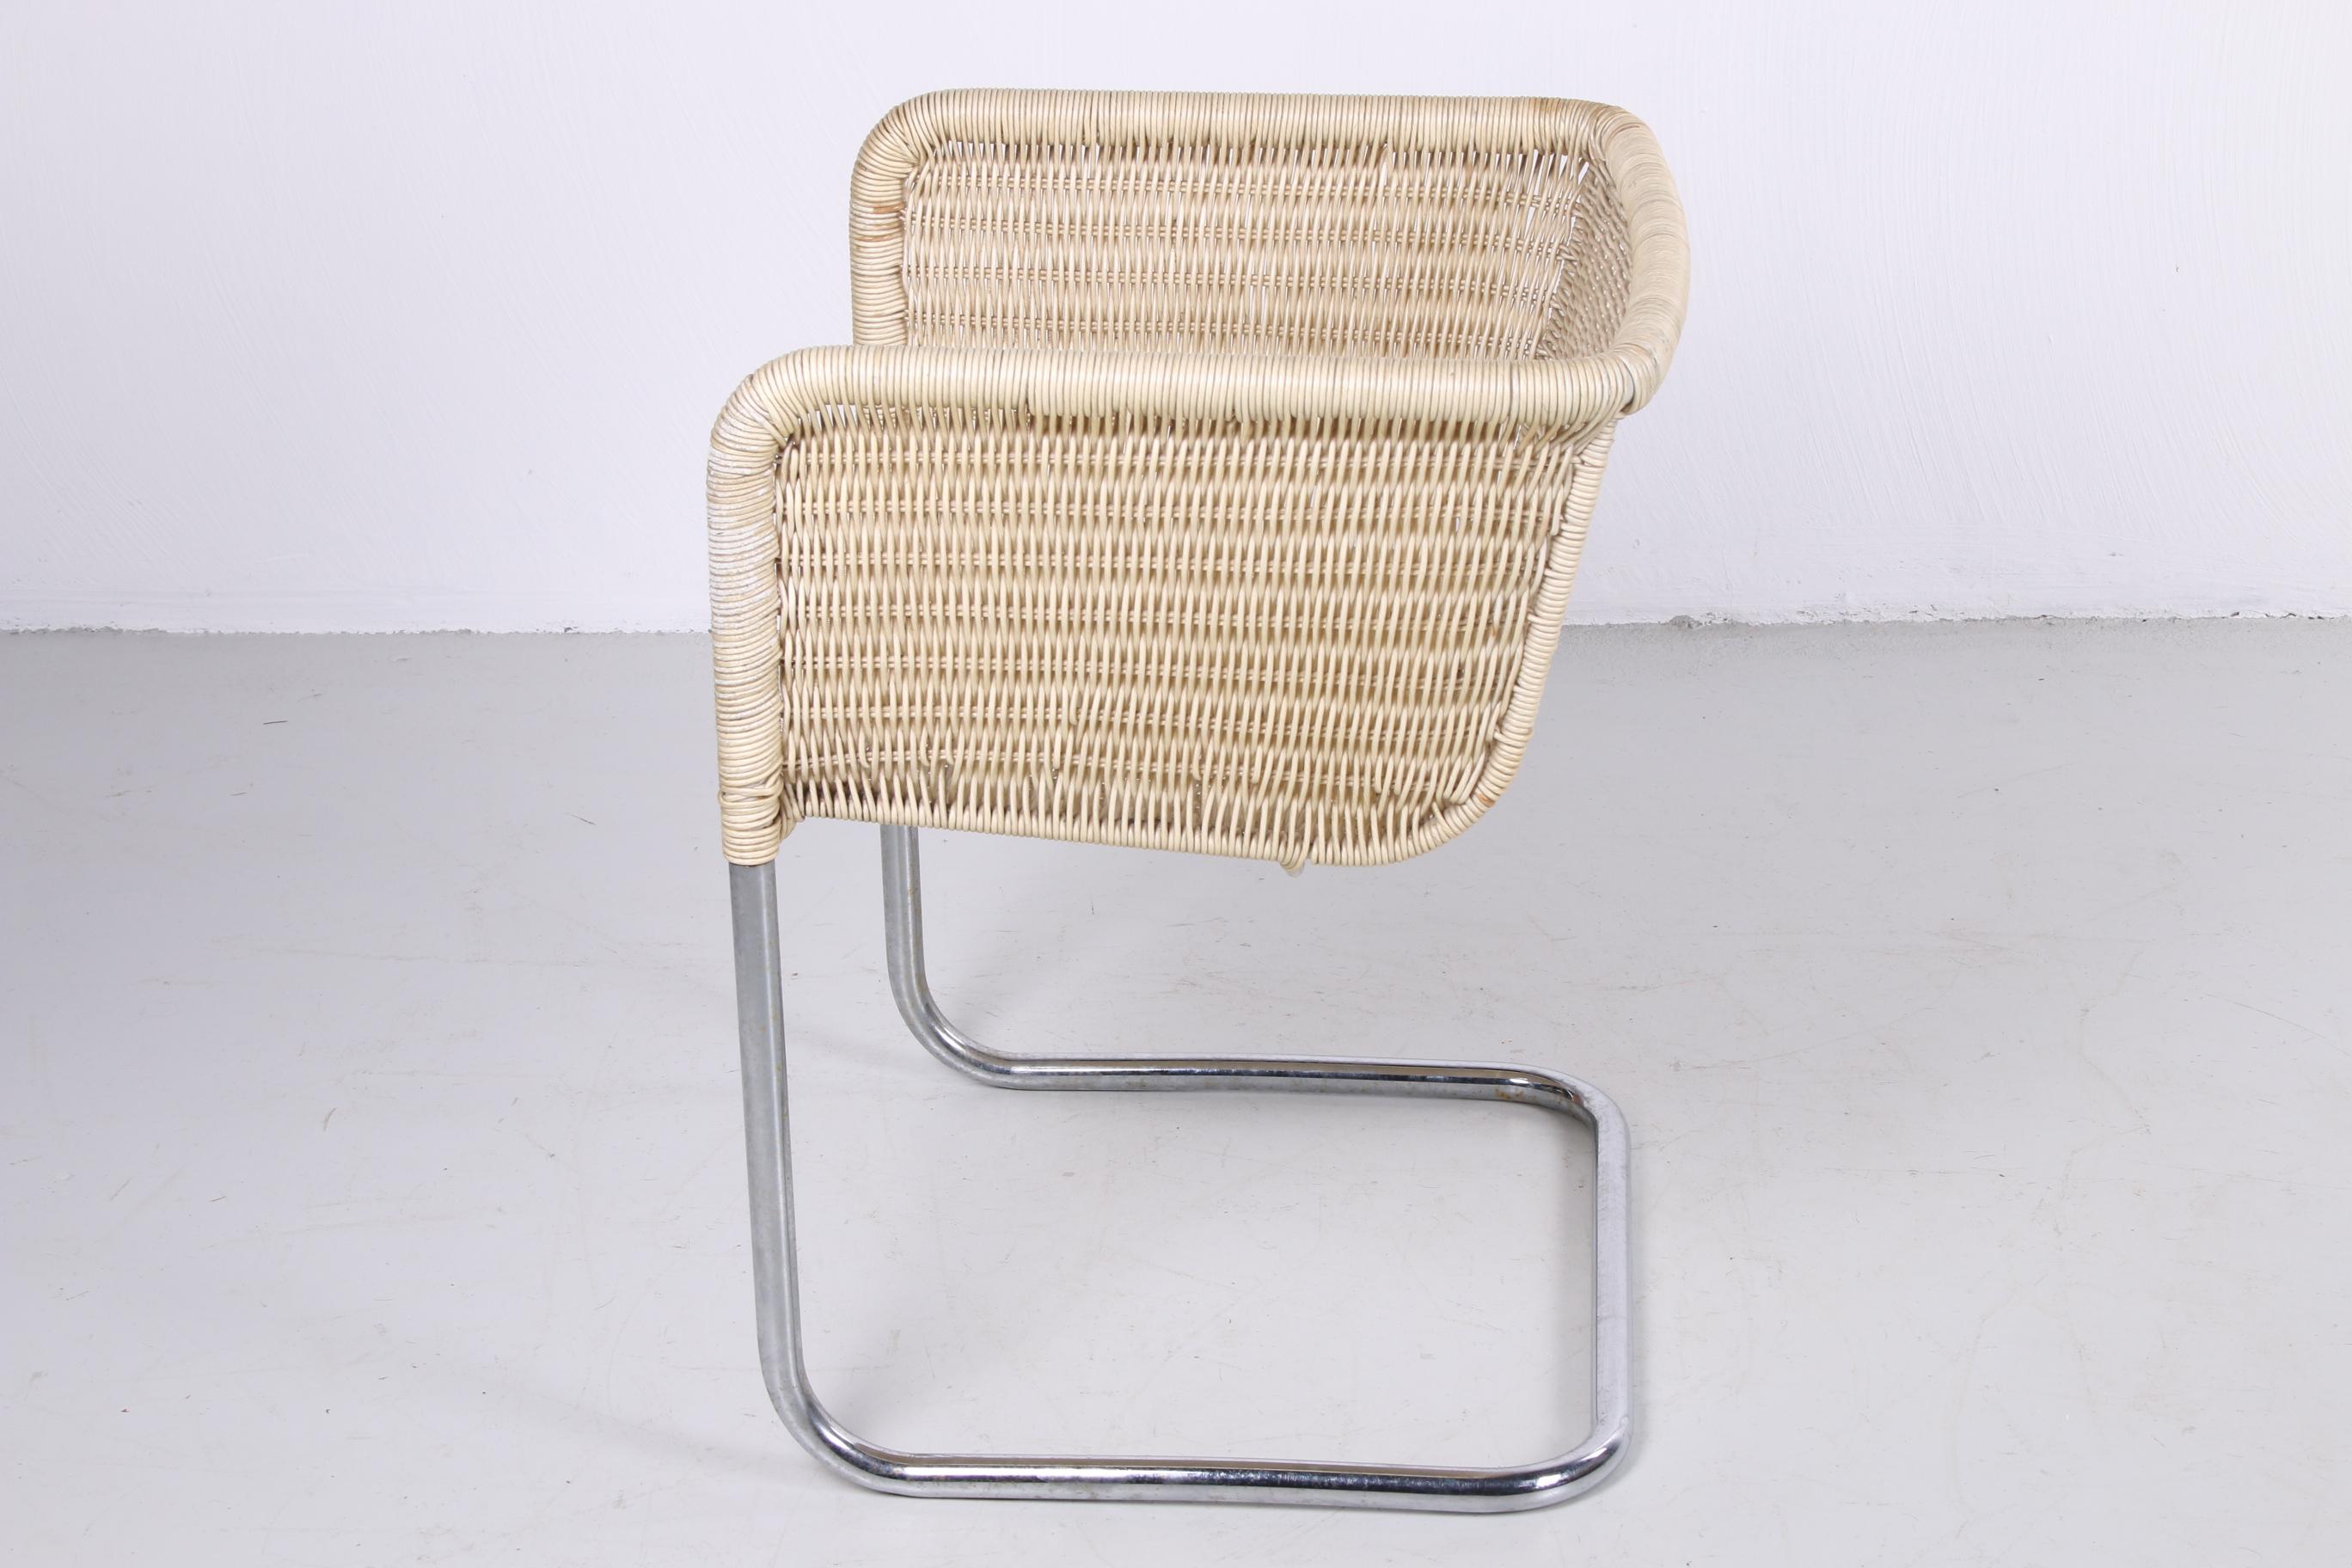 This is a set of 4 chairs, made of a tubular frame wrapped with reed.

This is model D43 from Bauhaus for Tecta swing chair. This set goes per 4

The chairs look Fine and have held up well over the years, 1 chair has a little damage on the